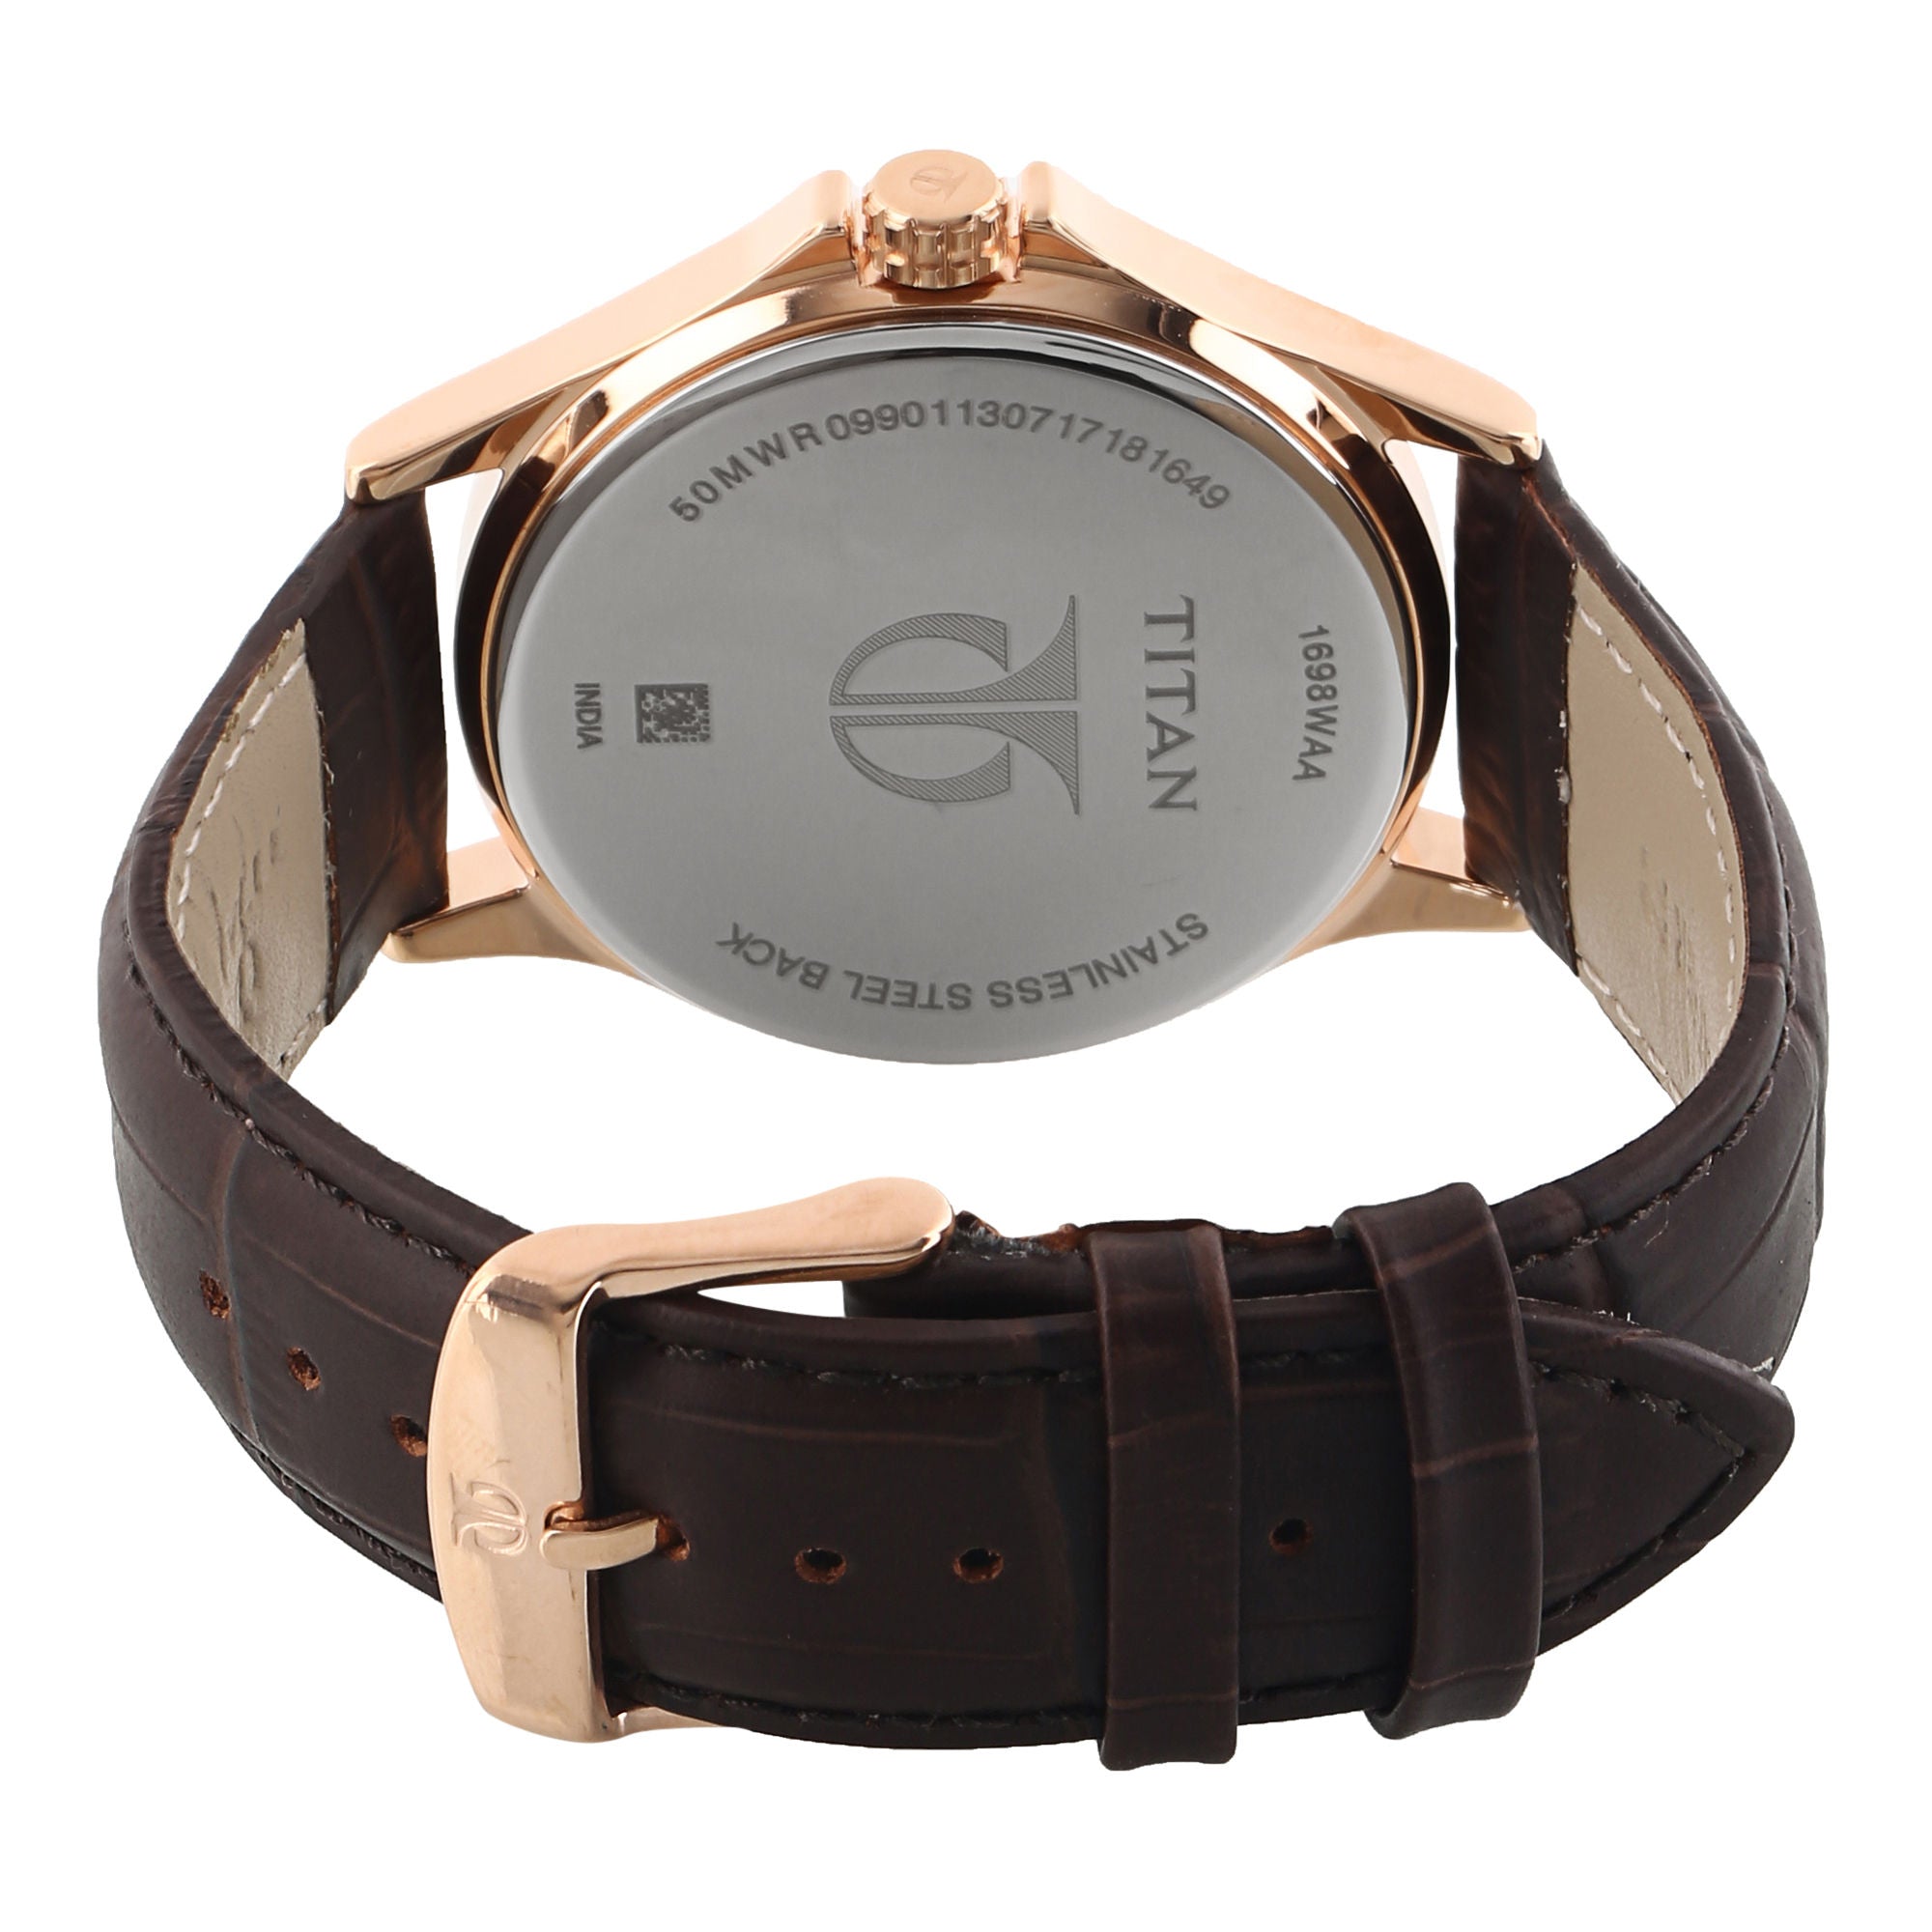 Workwear Watch with Black Dial & Leather Strap - Titan Corporate Gifting